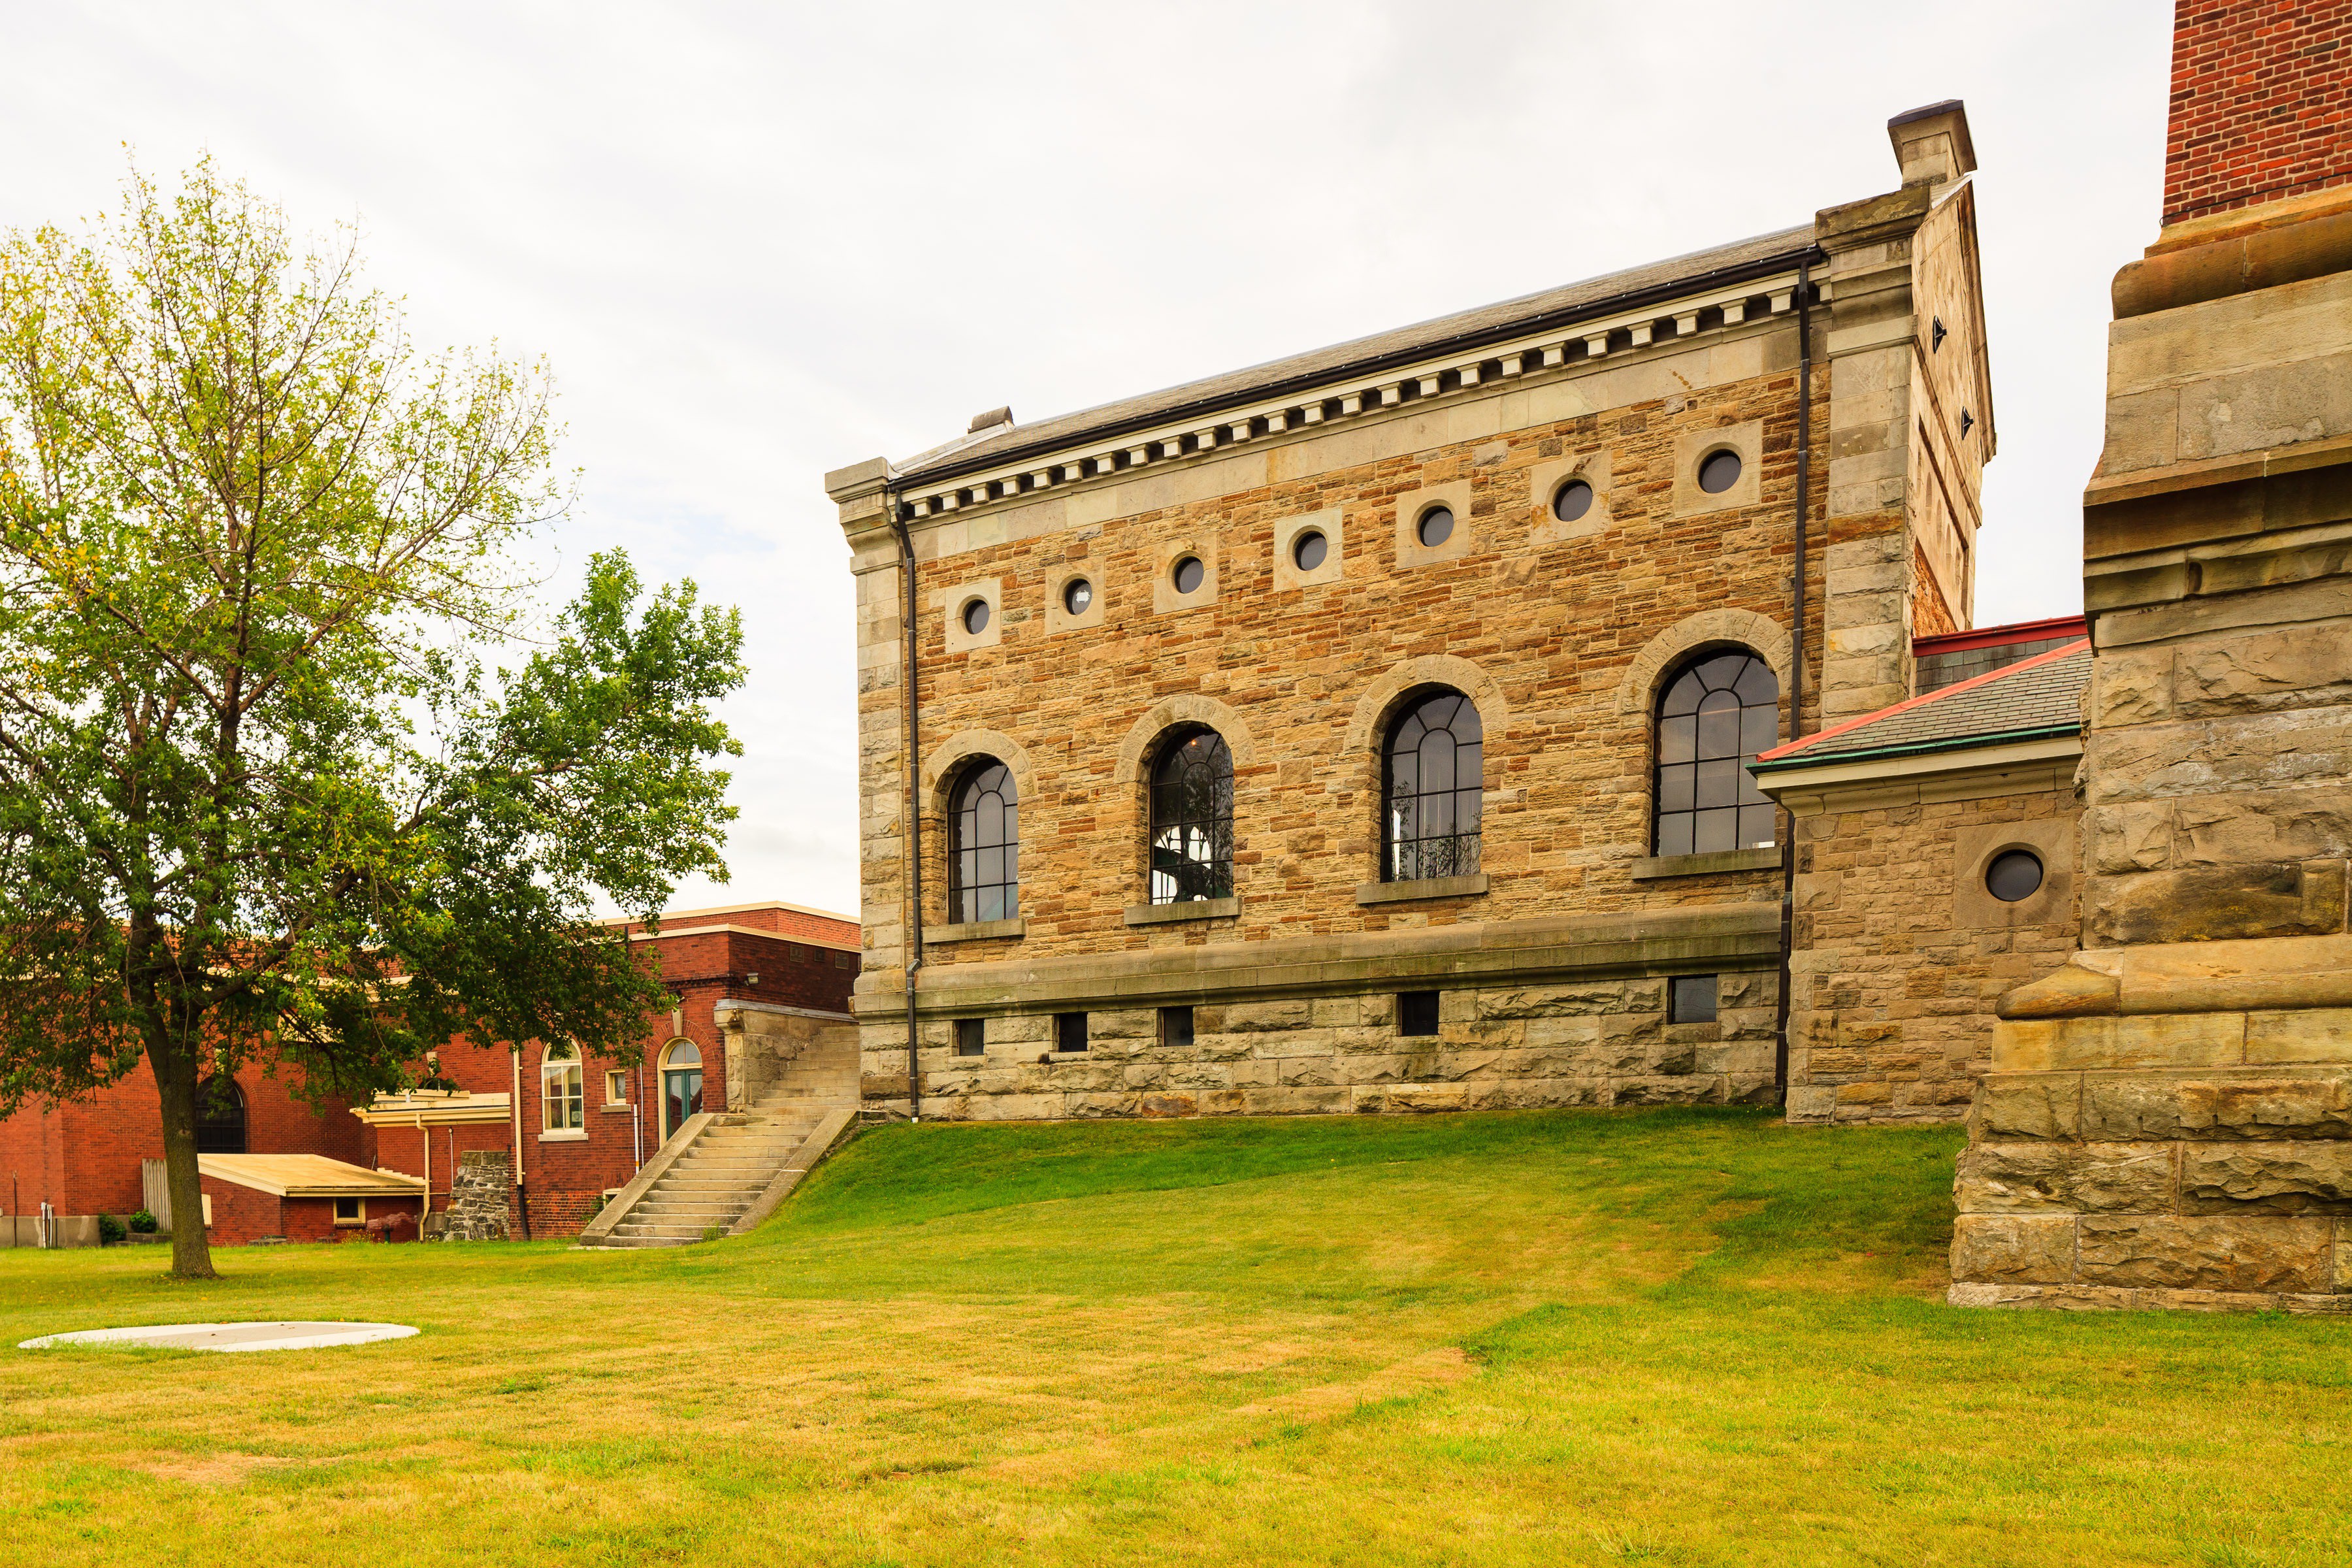 Hamilton Museum of Steam and Technology National Historic Site